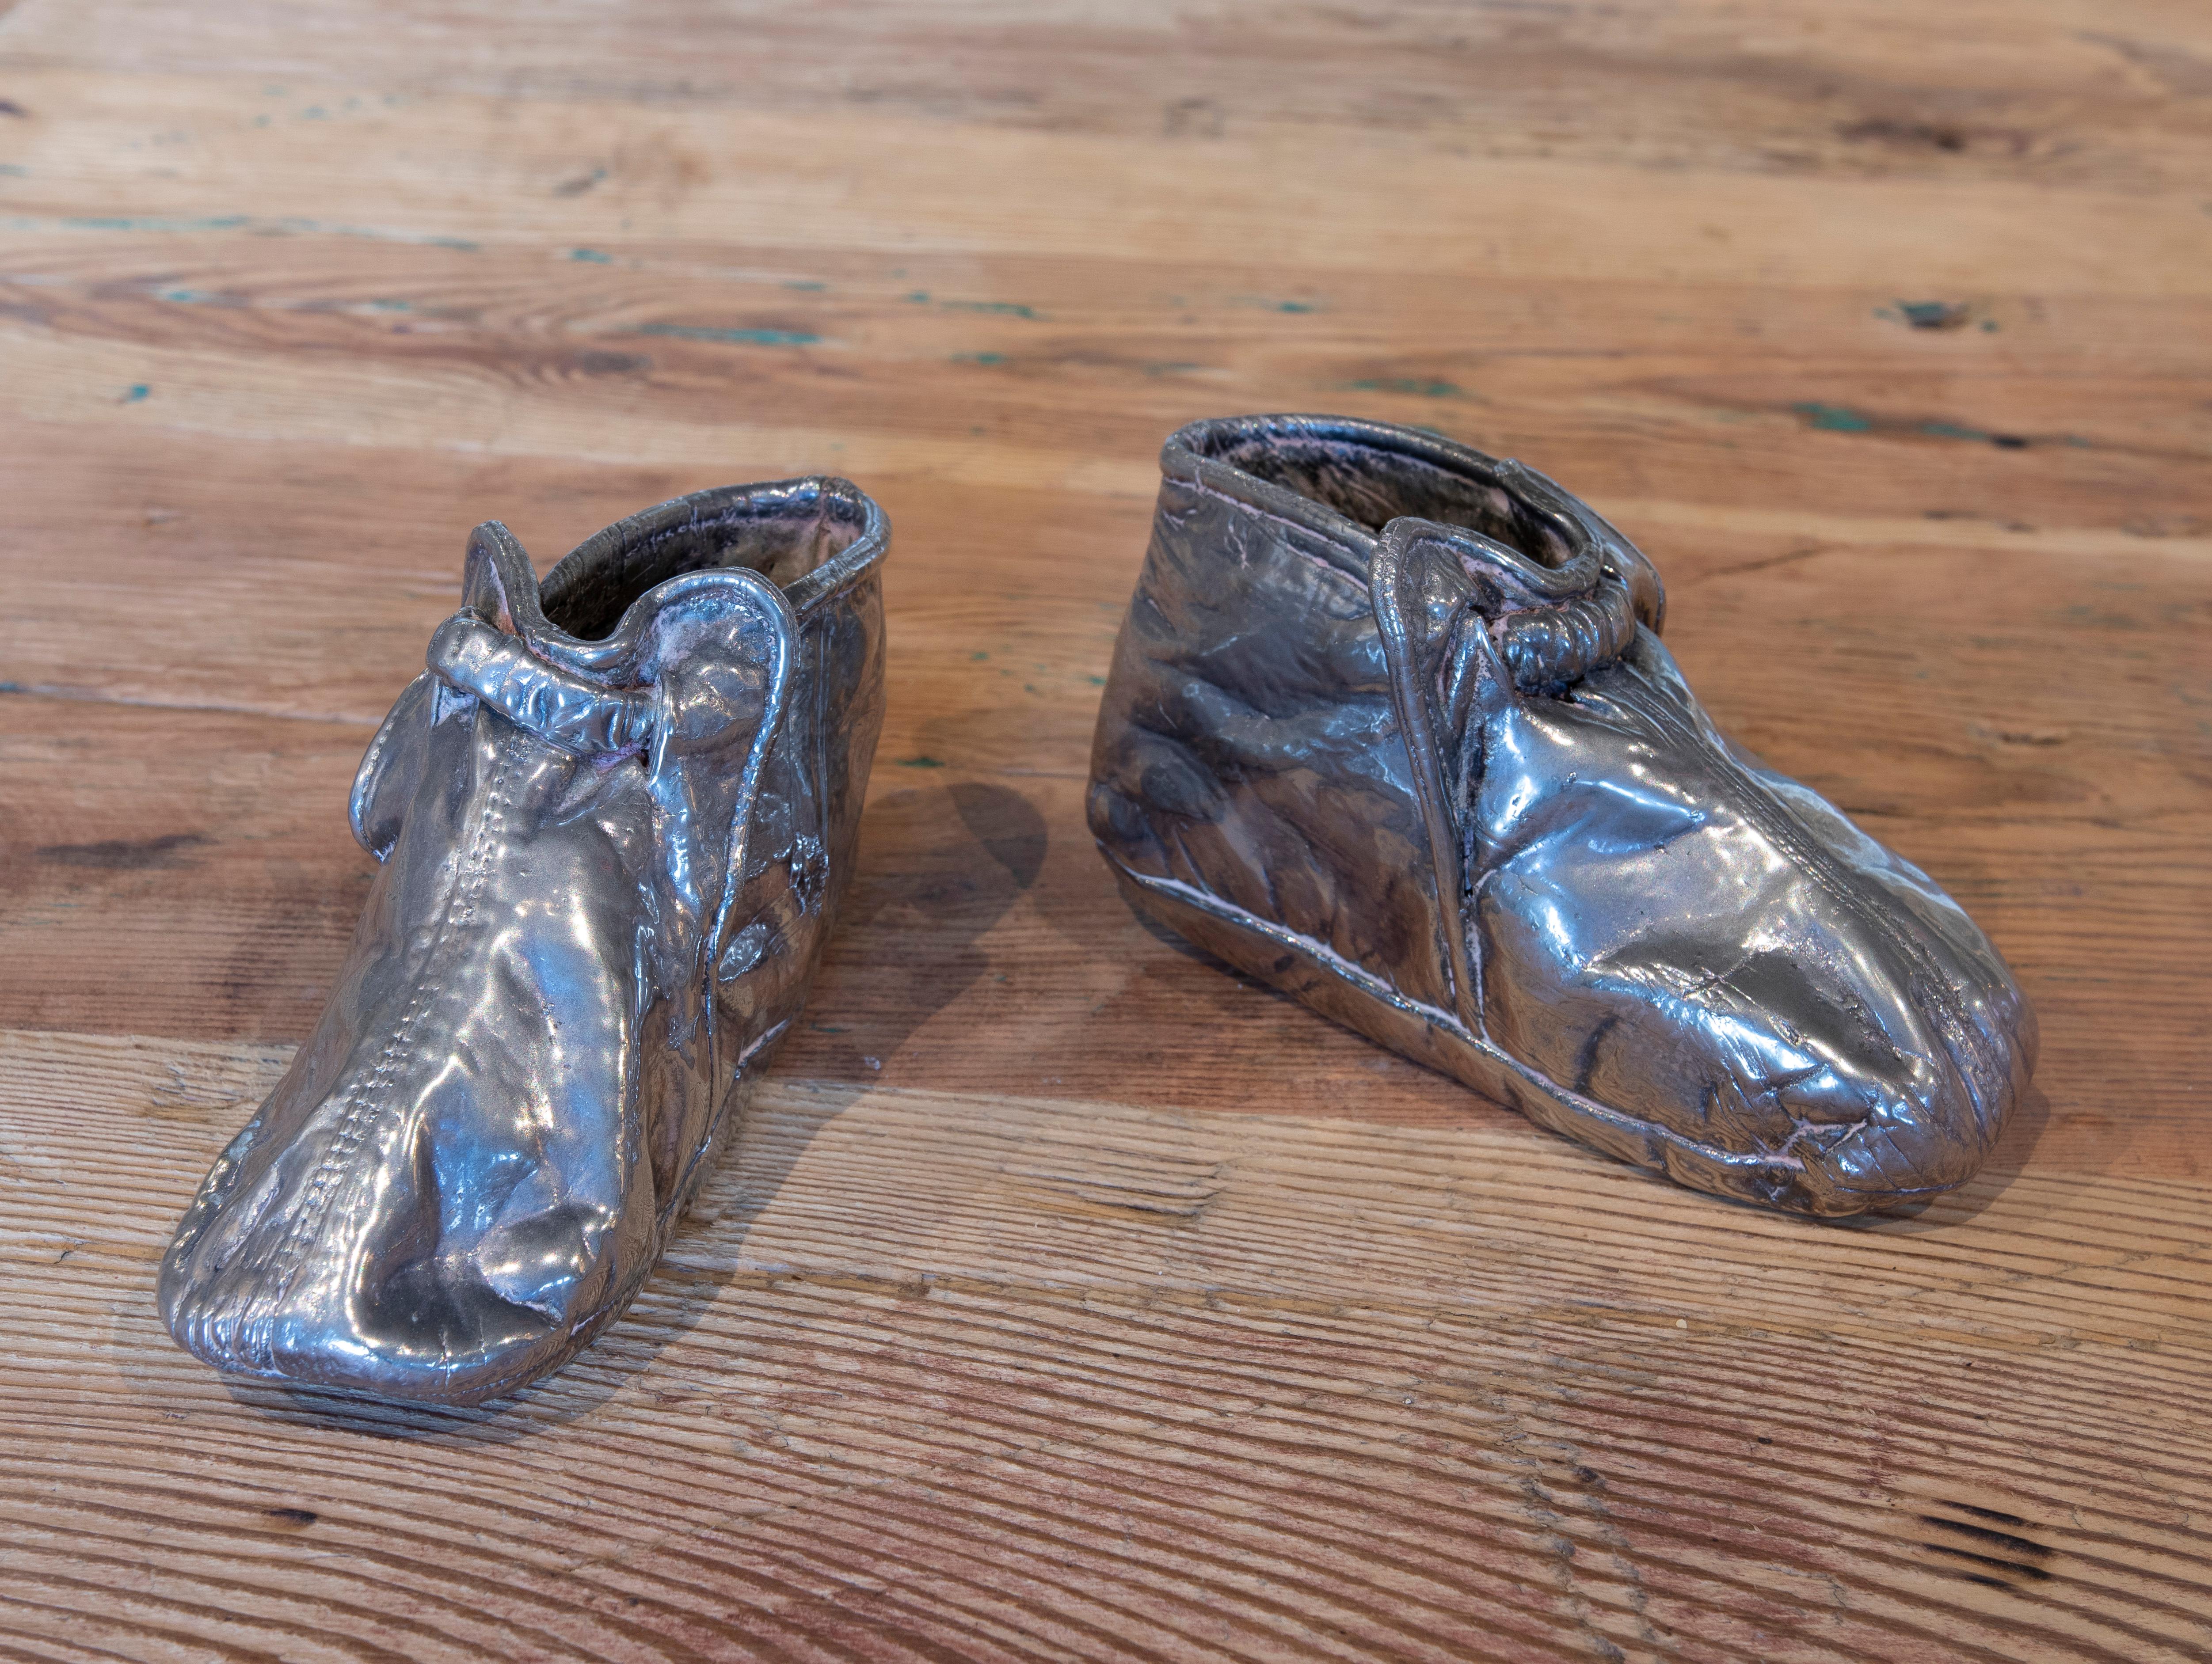 1970s English pair of silver plated metal shoes.